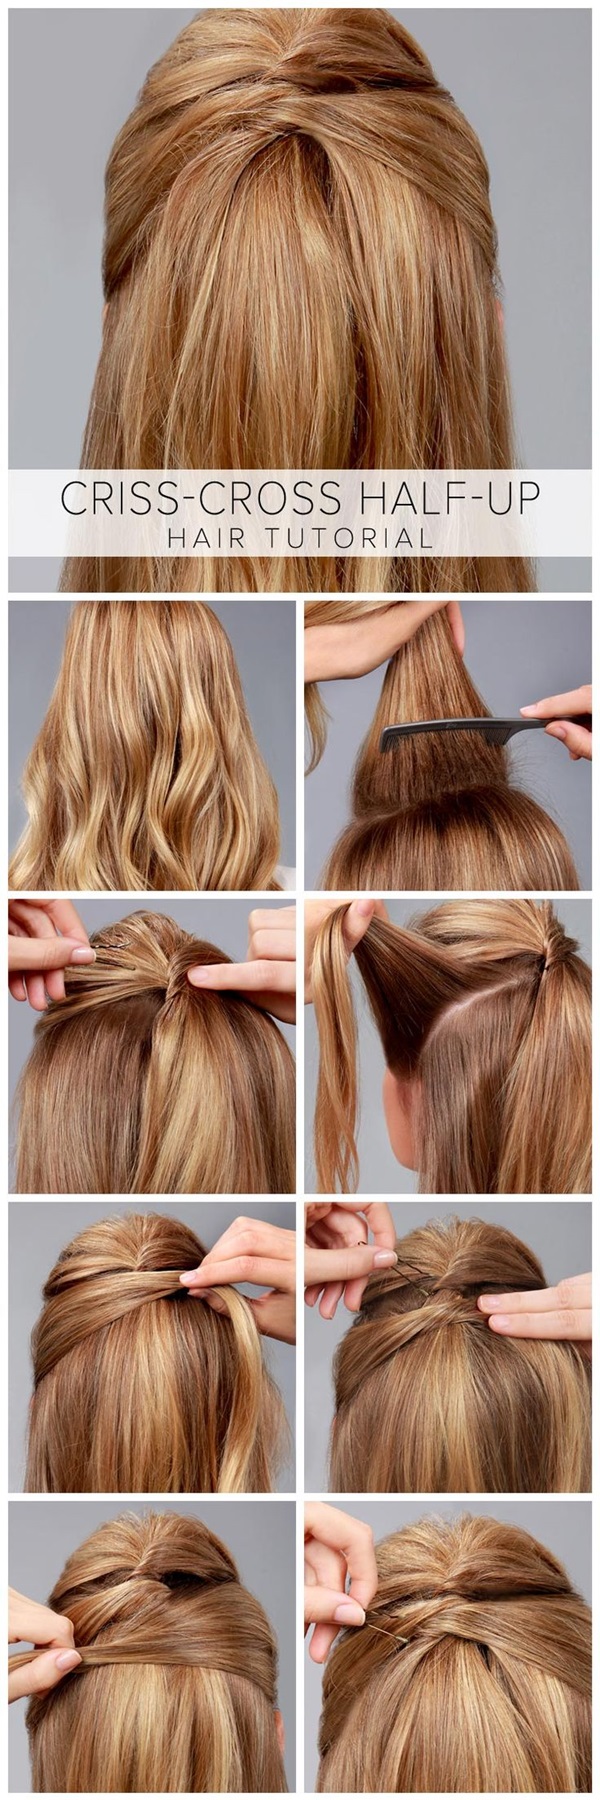 Simple Five Minute Hairstyles (19)